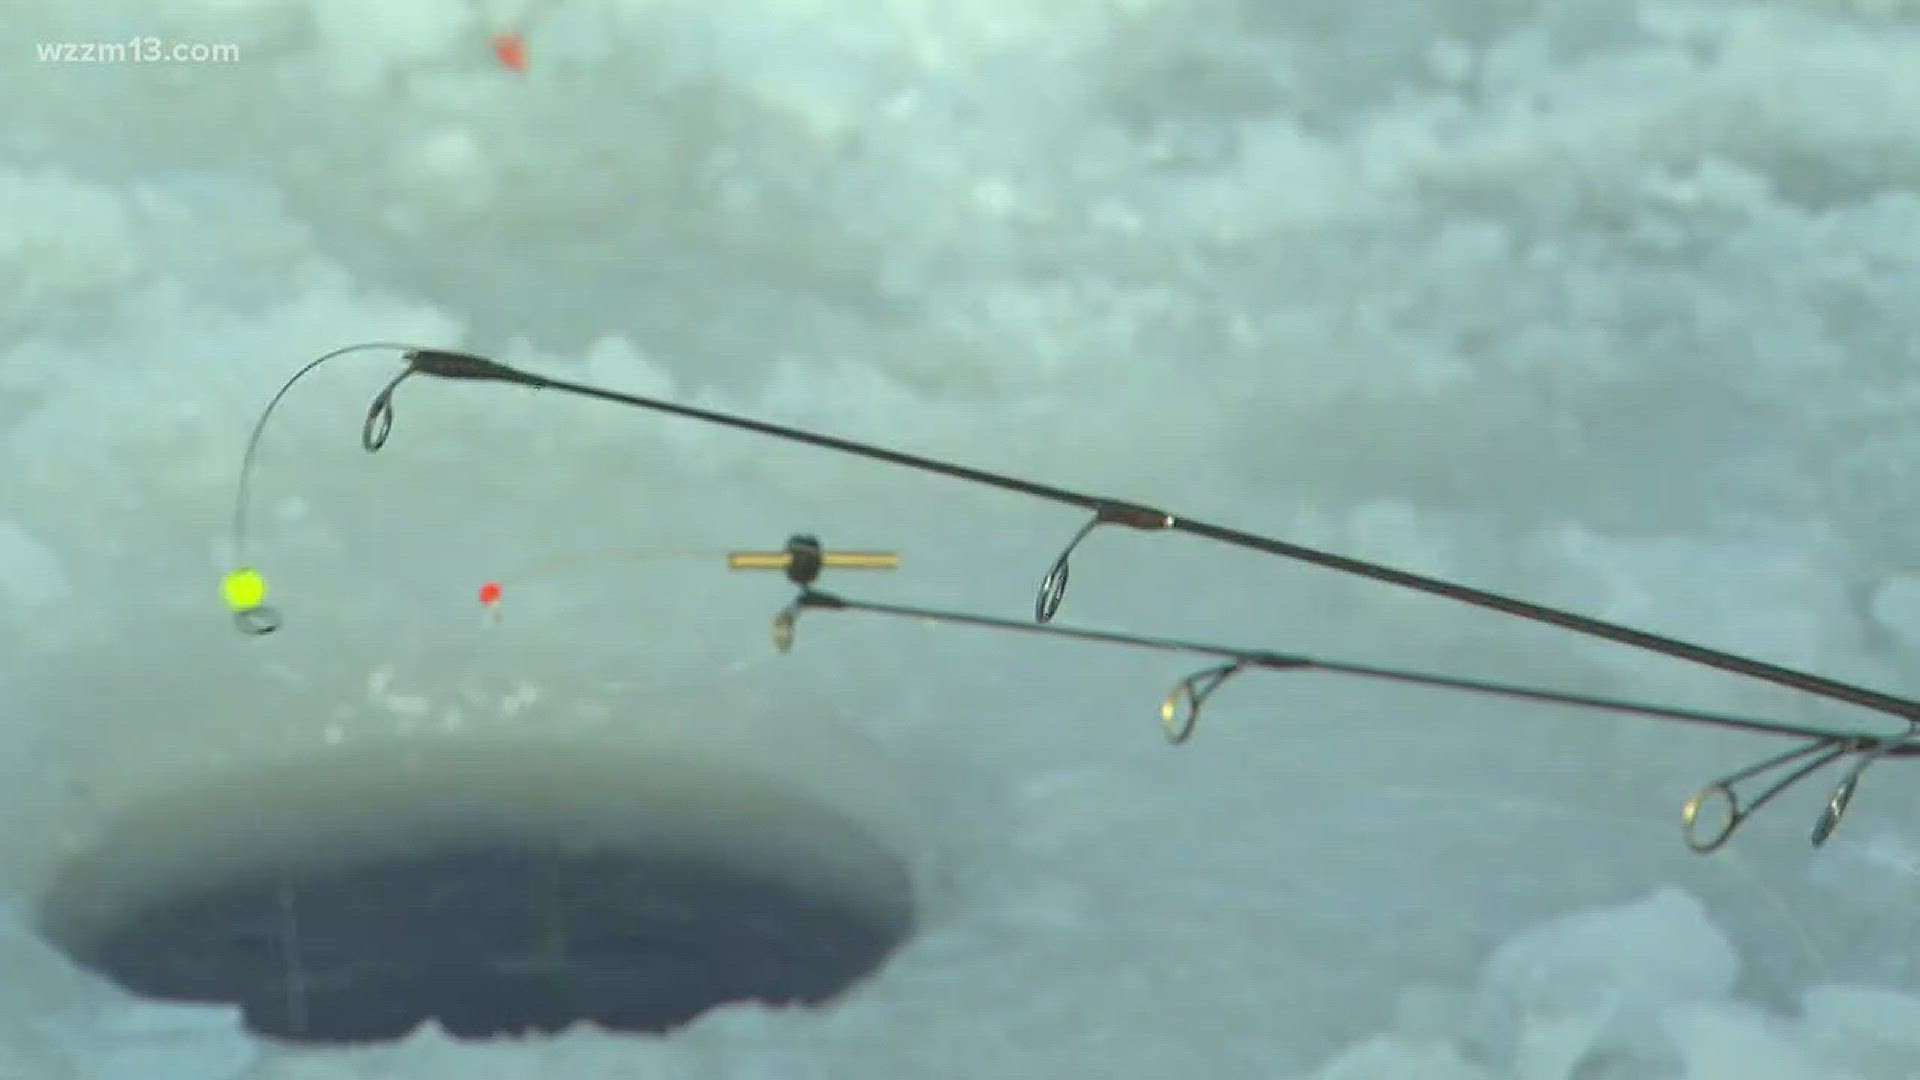 Regardless of the weather, you'll see these ice fishers out.